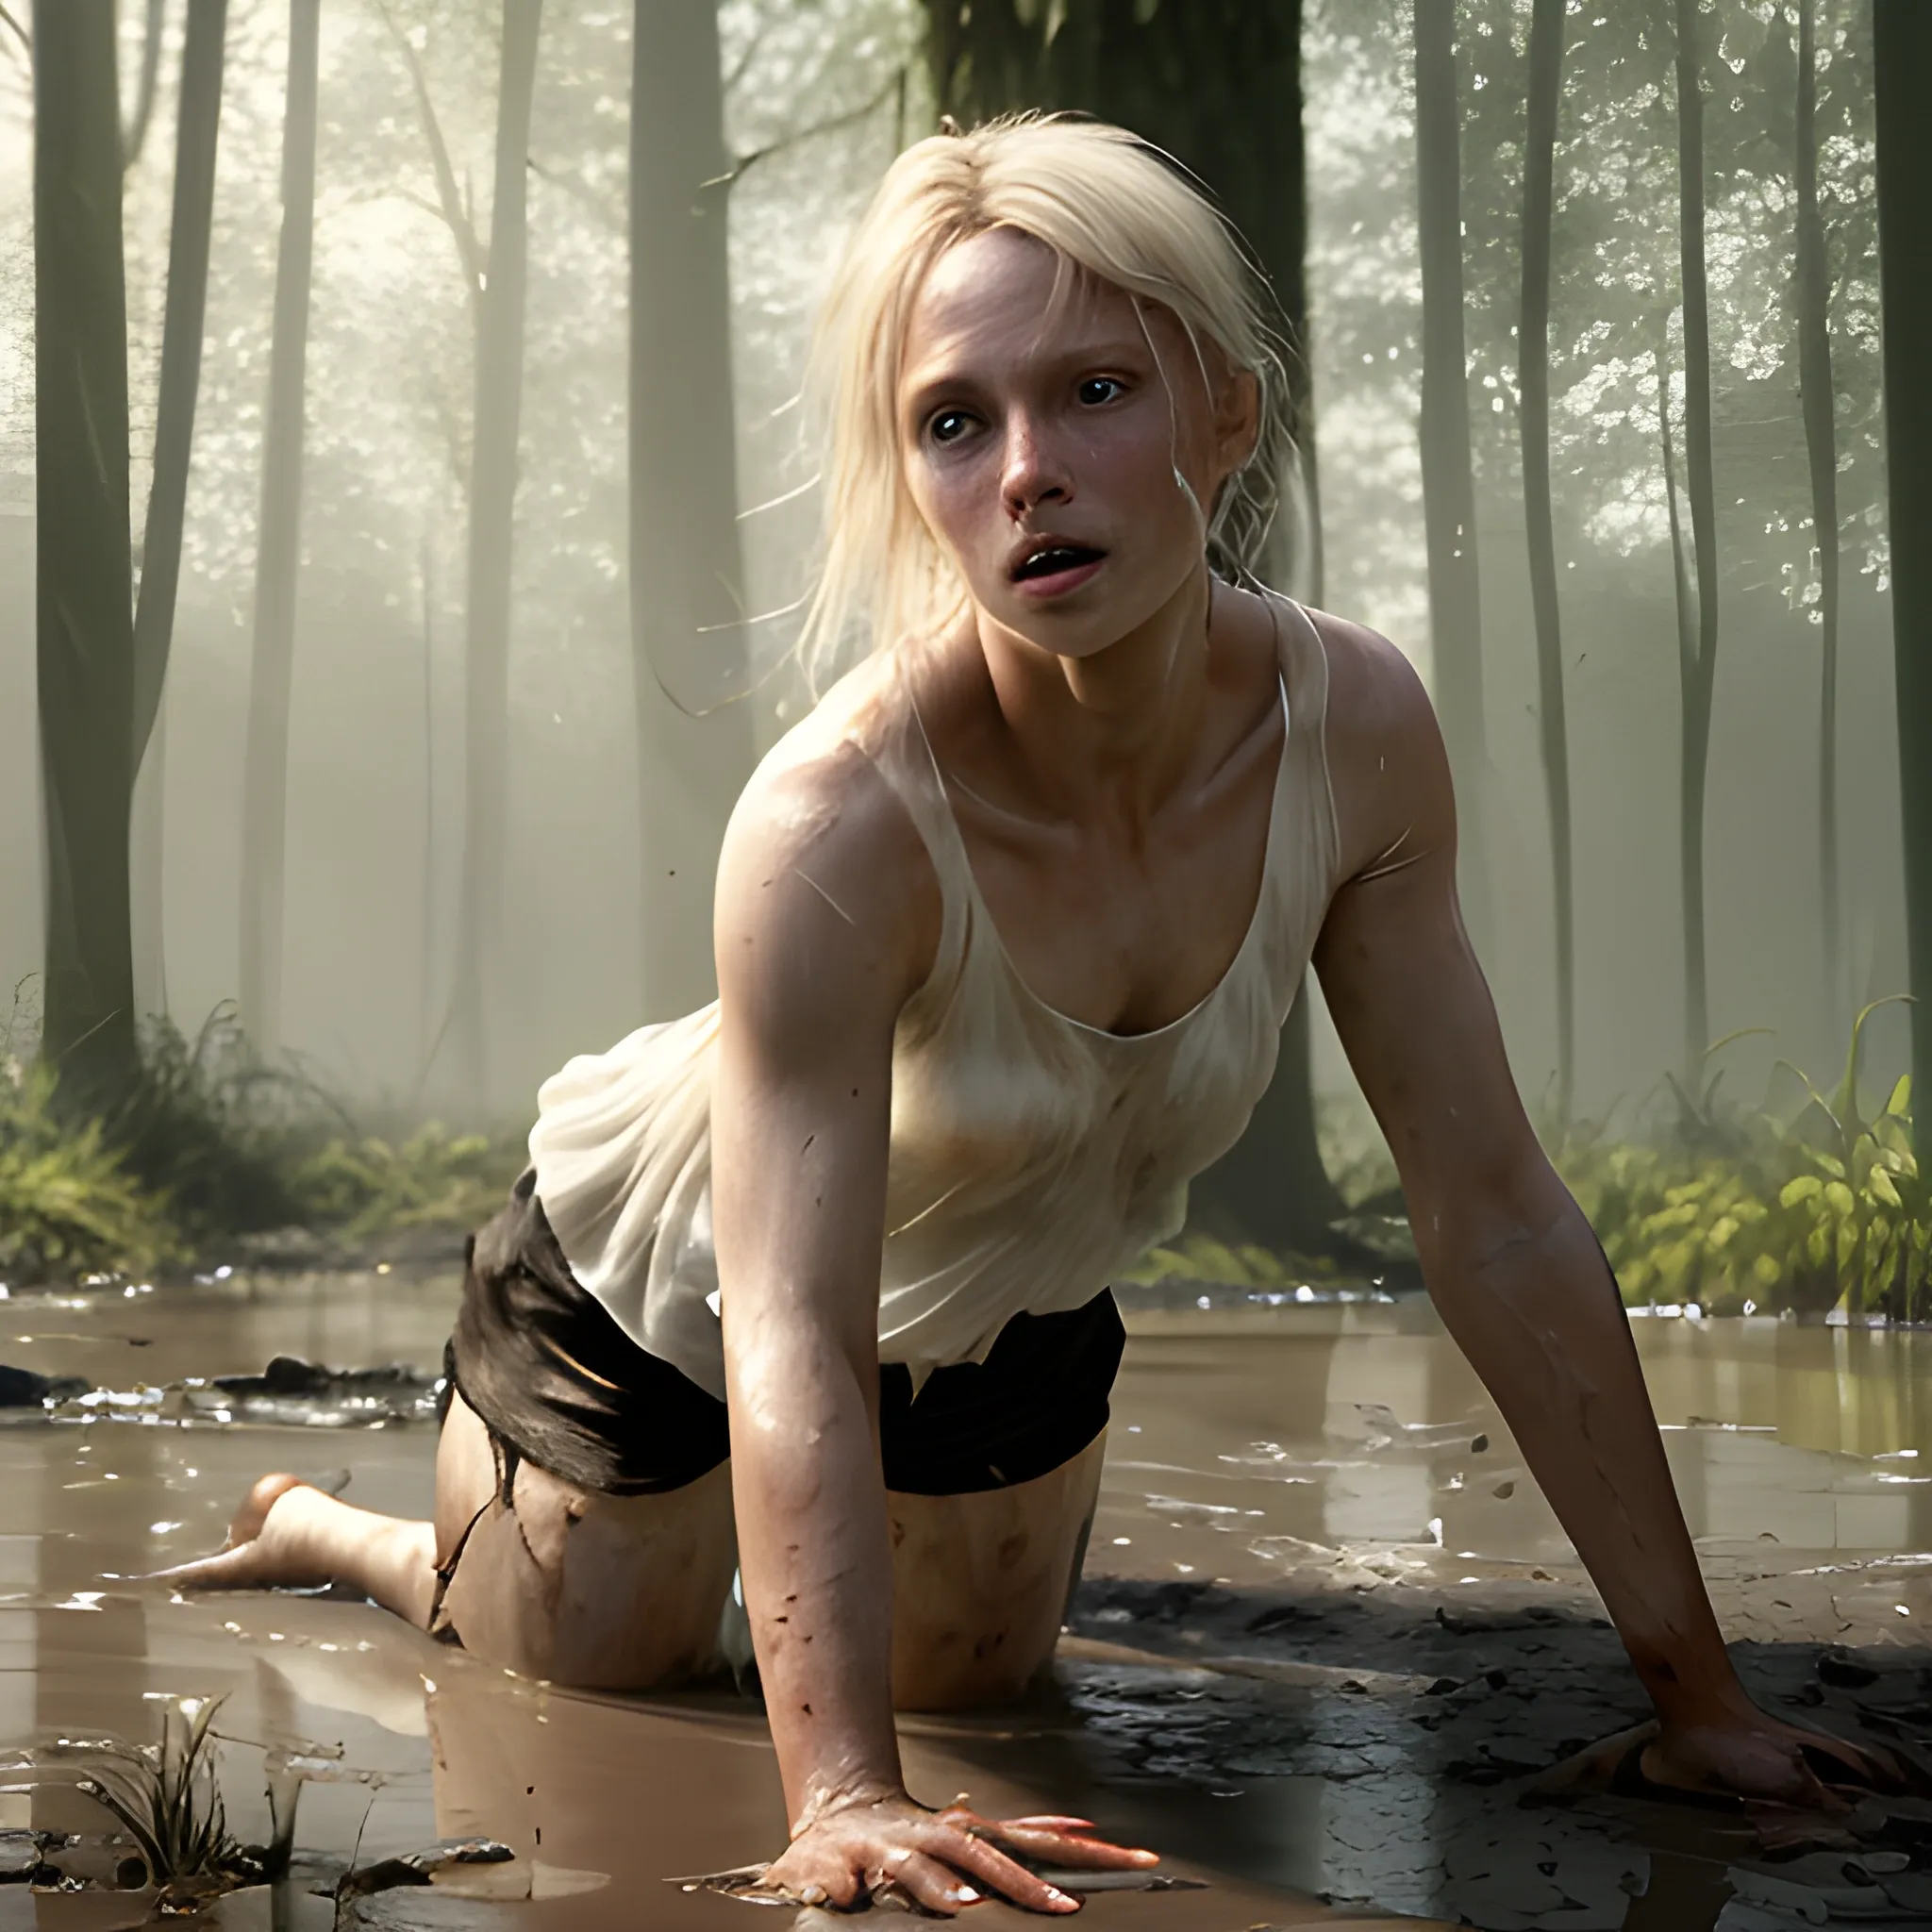 A fair-skinned woman, crawling slowly out of the muddy swamp, in a dark, late-afternoon setting, with few rays of sunlight breaking through the trees. Her blond hair, short and damp, falls over her face as she struggles to get free. Wearing delicately soiled white silk shorts and a sheer white silk top, the ambient light reveals the sheer texture of the fabric in contrast to her skin. Soft light tones enhance her figure, while dancing shadows add a dramatic touch to the scene. Every detail is rendered hyper-realistically, capturing the beauty and intensity of the moment. The image is a cinematic masterpiece, with high resolution, vibrant colors and high contrast, providing an immersive visual experience in 8k, HDR and 500px. Created by Koos Roos